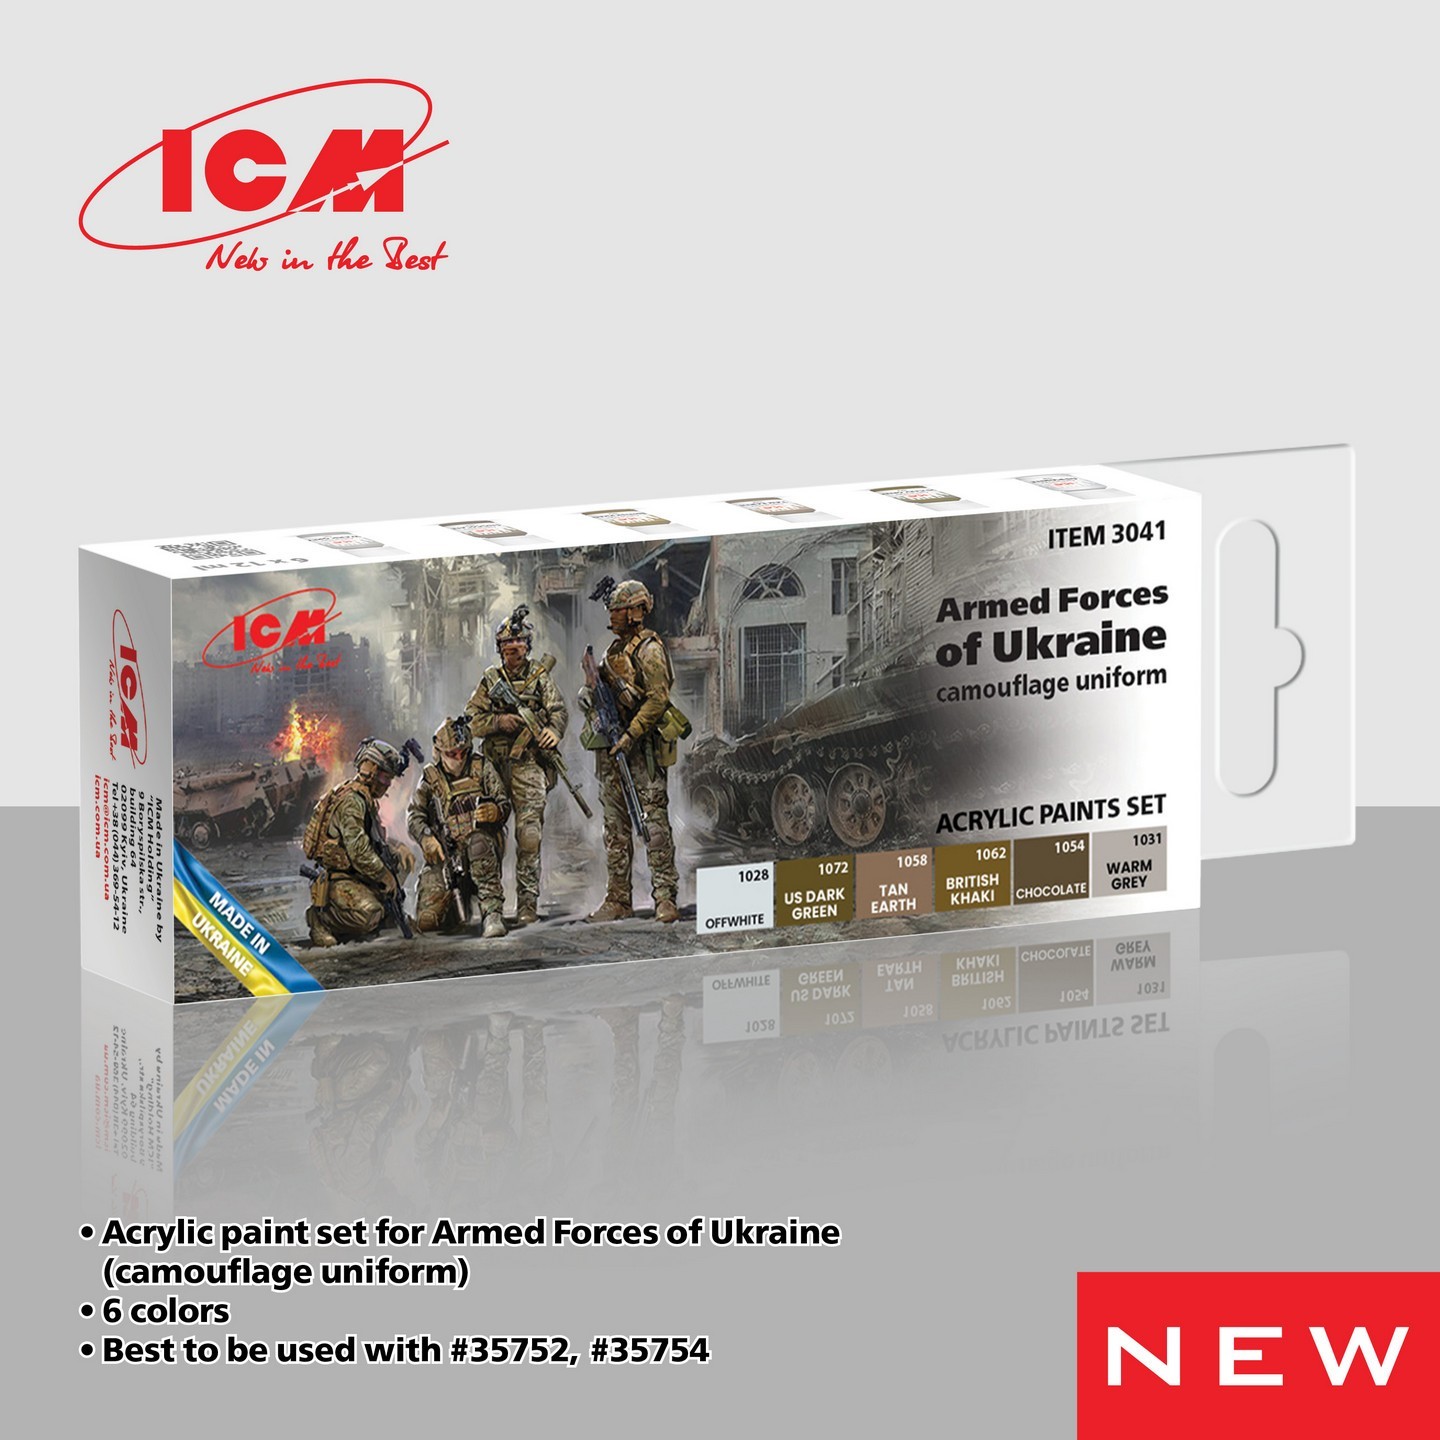 Acrylic paint set for Armed Forces of Ukraine